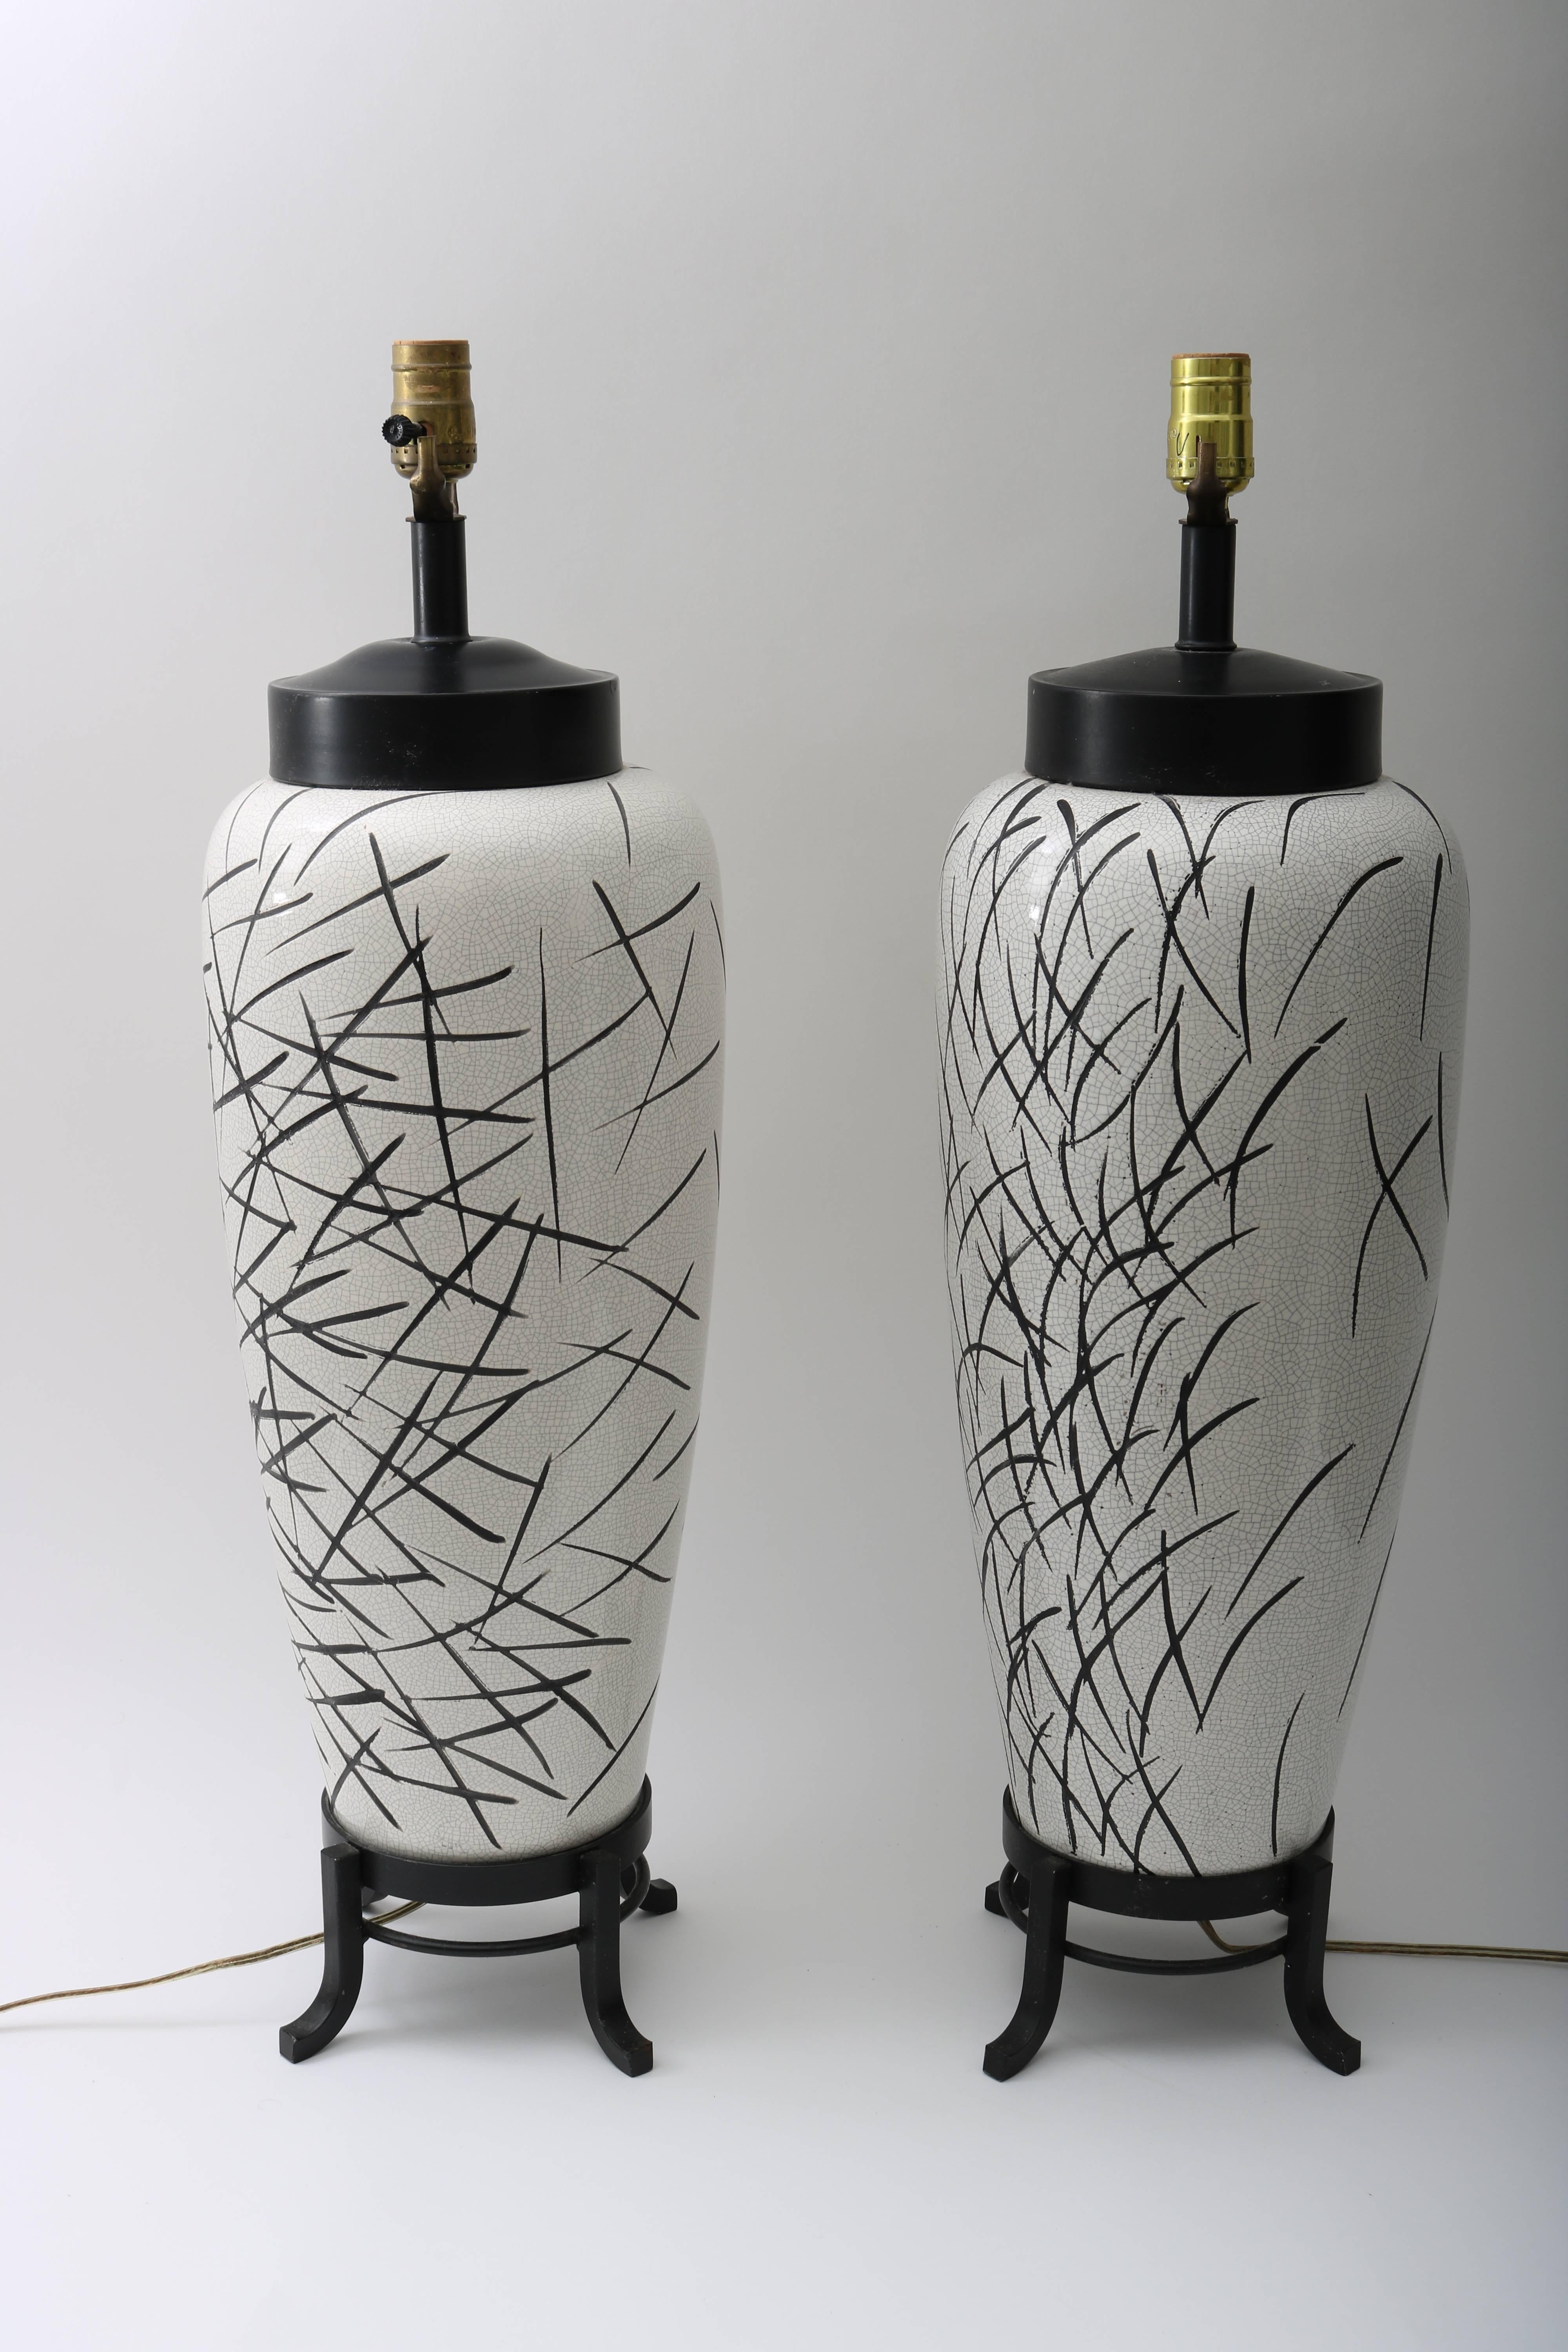 This stylish pair of table lamps date from the 1980s and are fabricated in glazed ceramic with a modern graphic detail of stroke marks. The pieces are not detailed identically yes have a great balance as a pair.

      